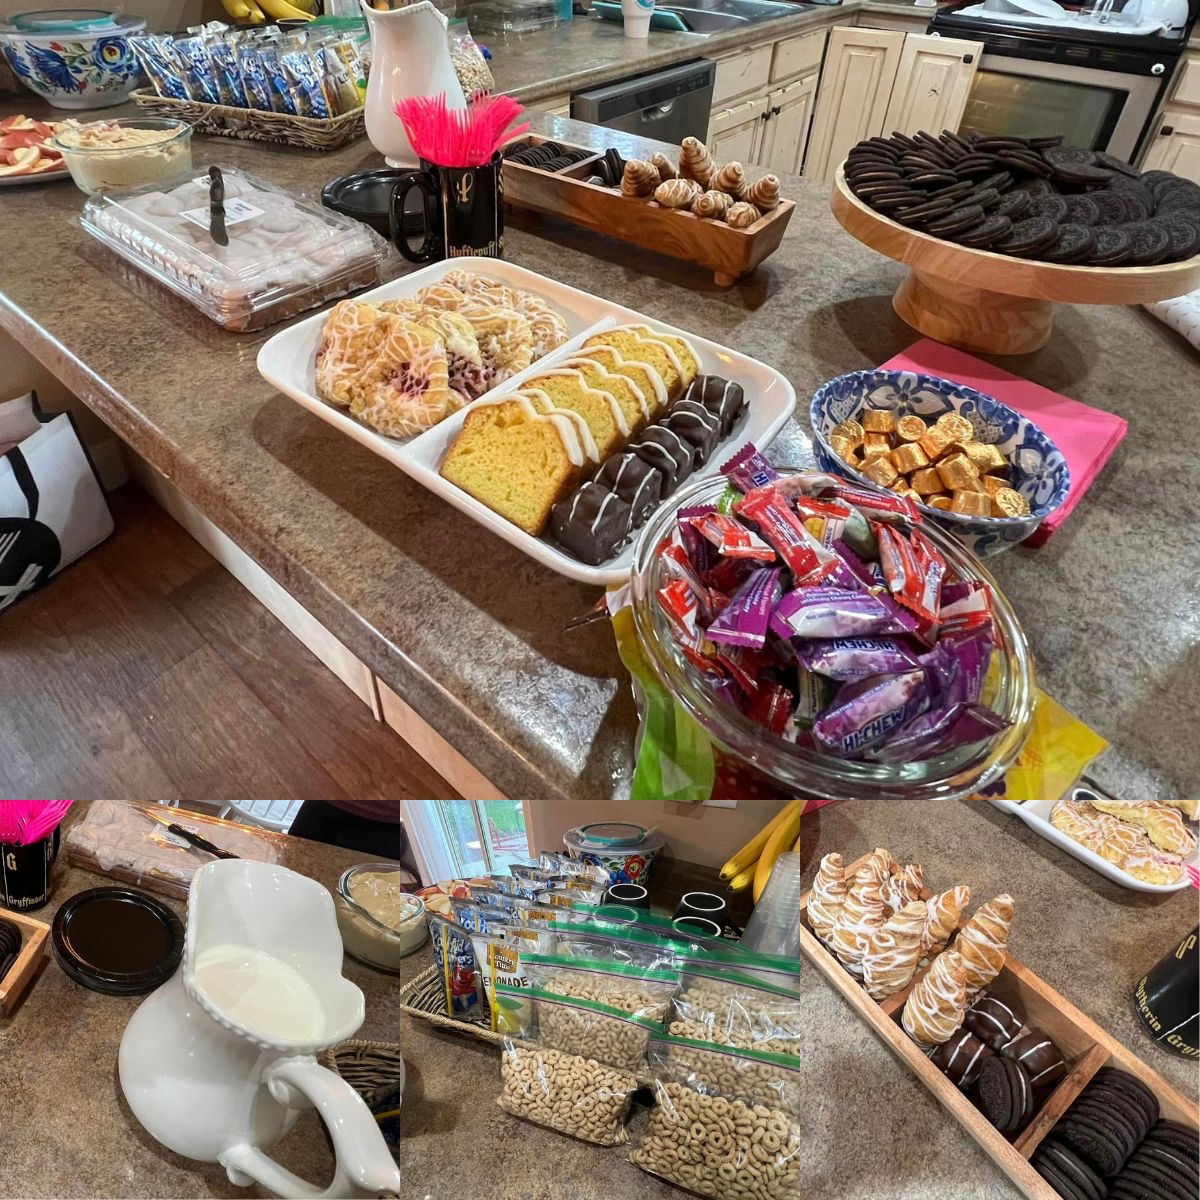 The photo collage shows the party food served at the book club.